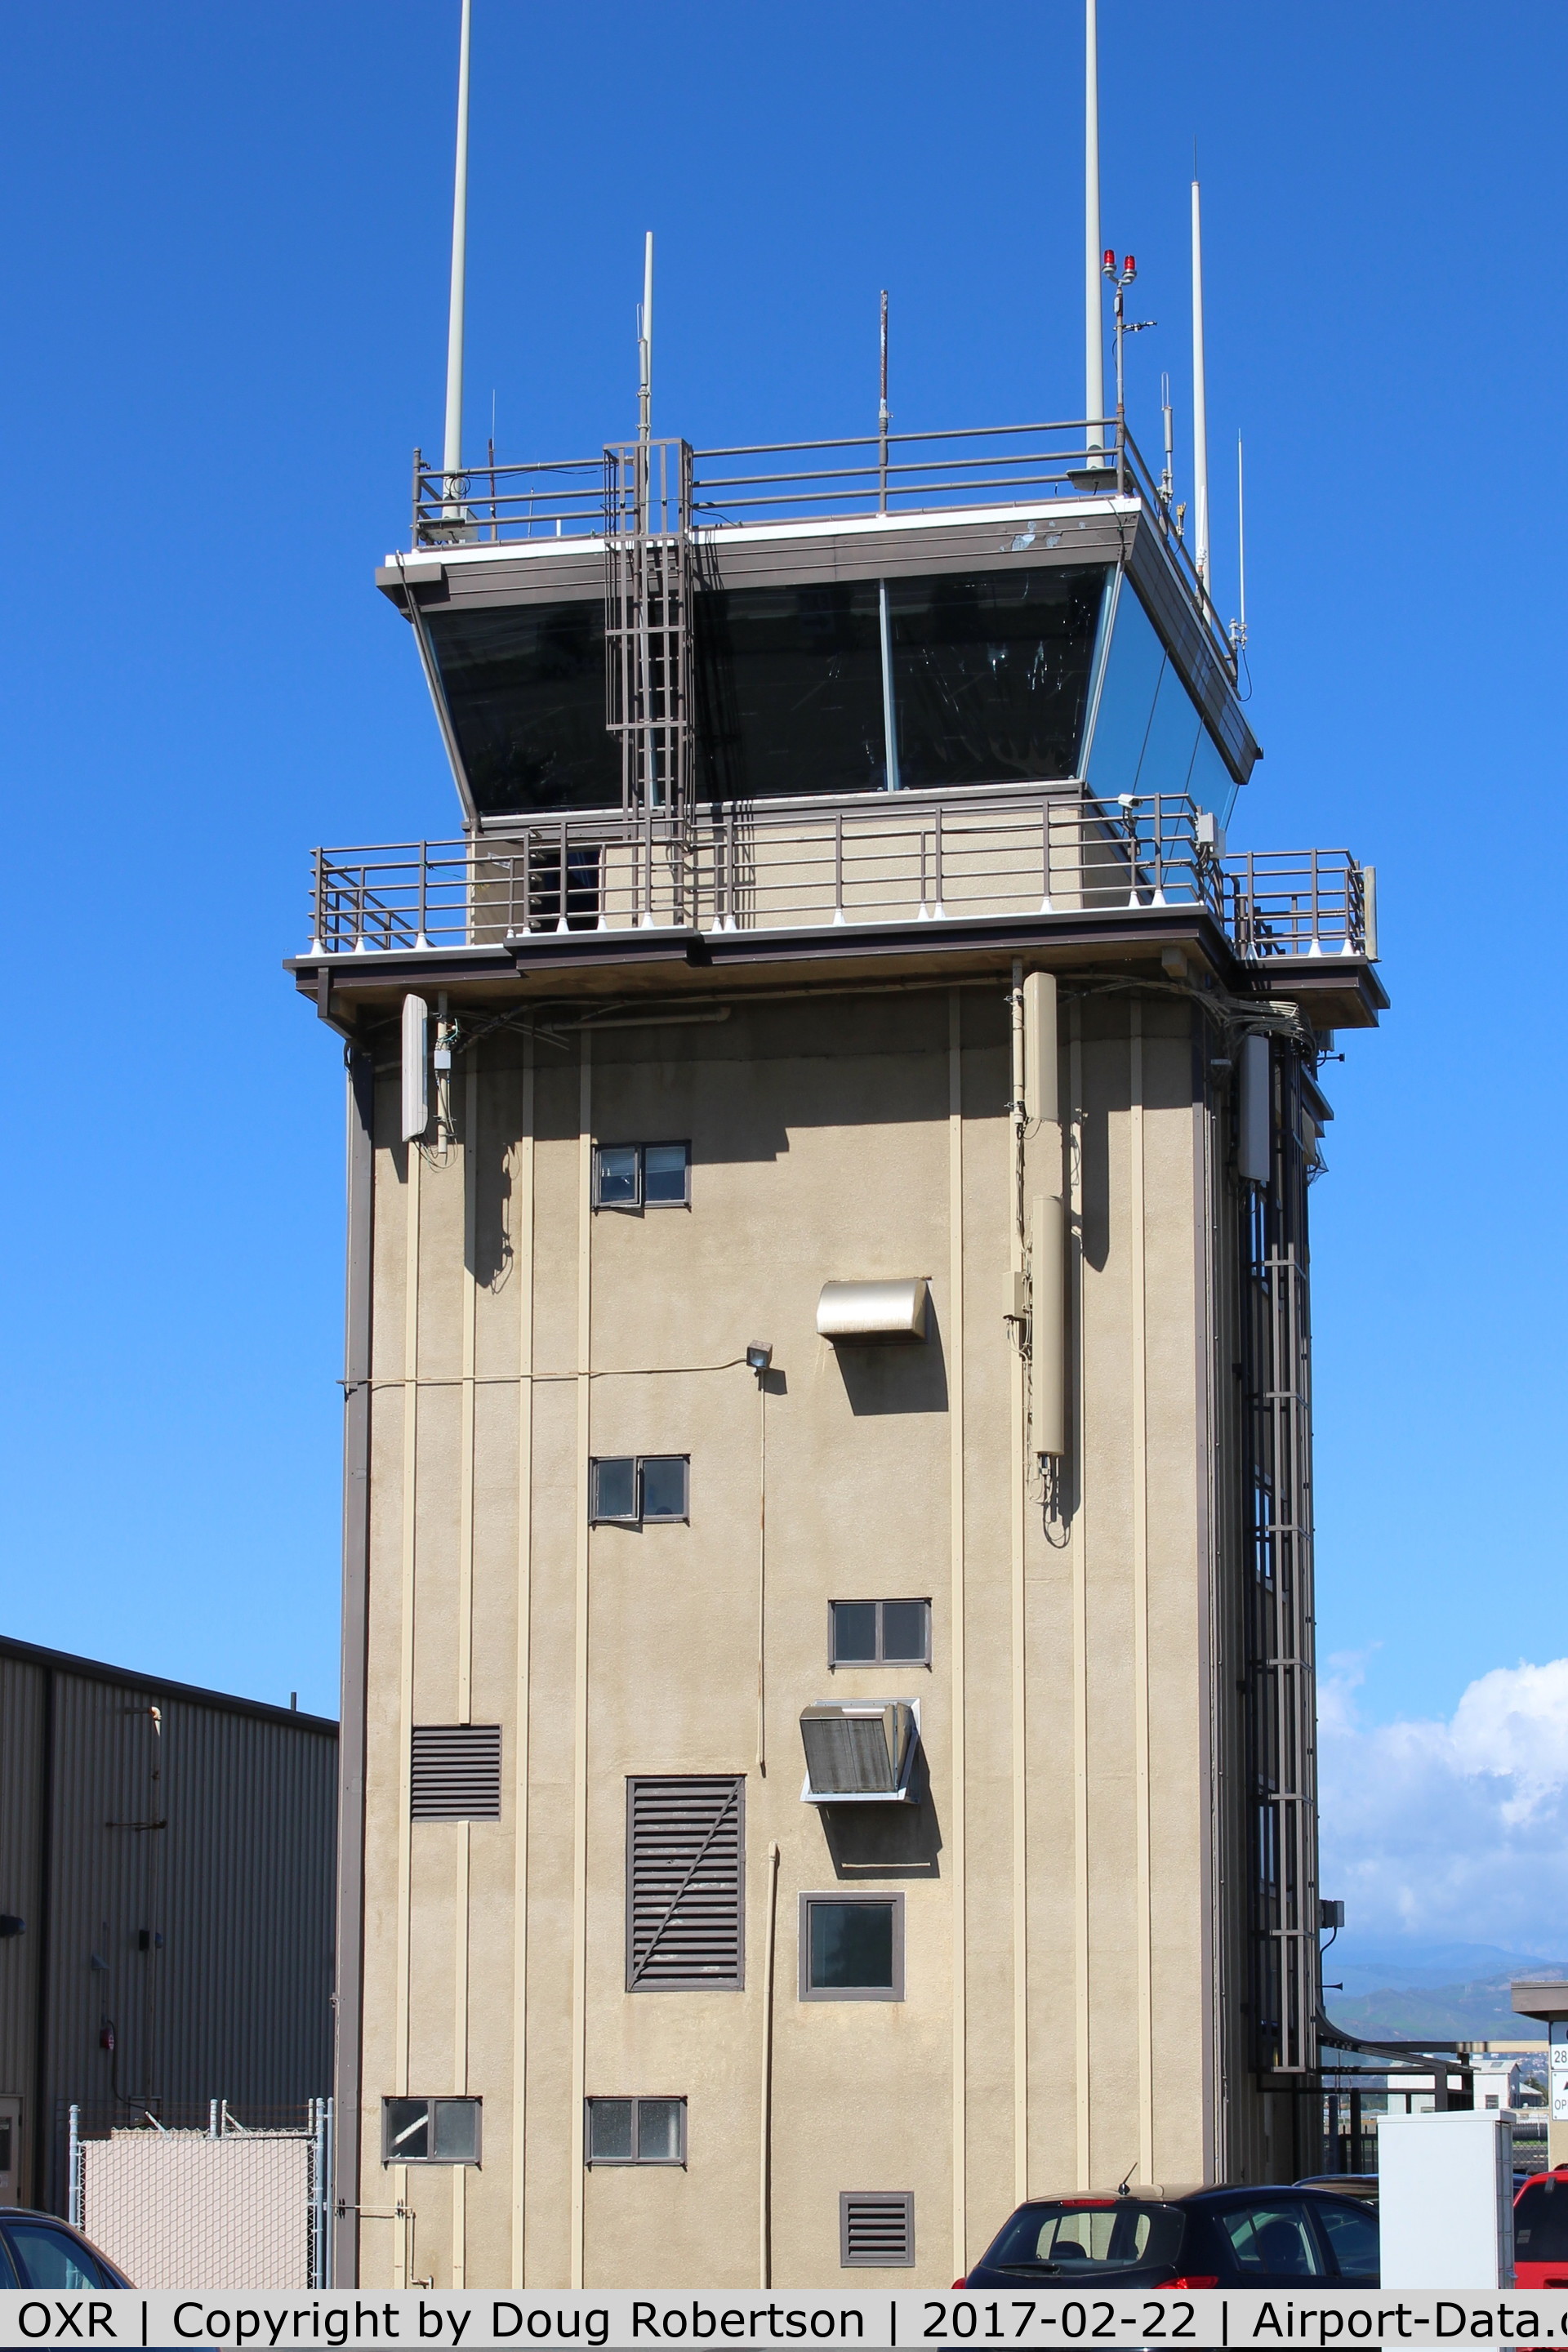 Oxnard Airport (OXR) - OXR FAA Control Tower, view south-side away from duty runway 07-25 to north of tower.